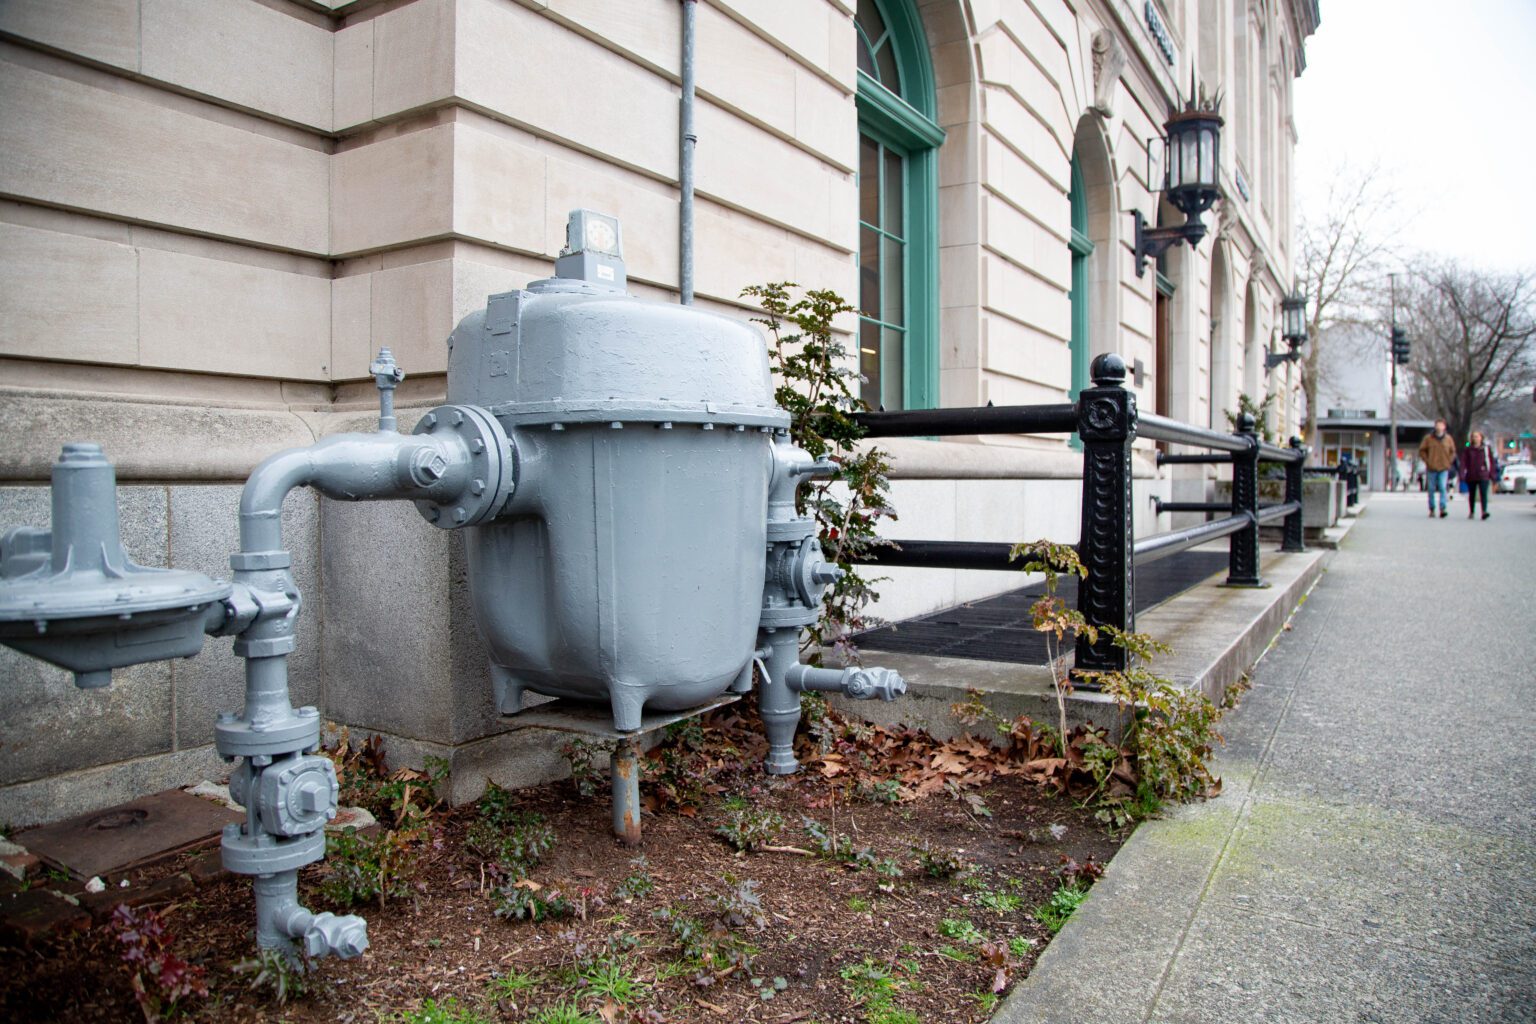 A meter measures natural gas usage at the Federal Building on Cornwall Avenue in downtown Bellingham. Natural gas will be prohibited for heating uses in new commercial and larger residential buildings in the city.